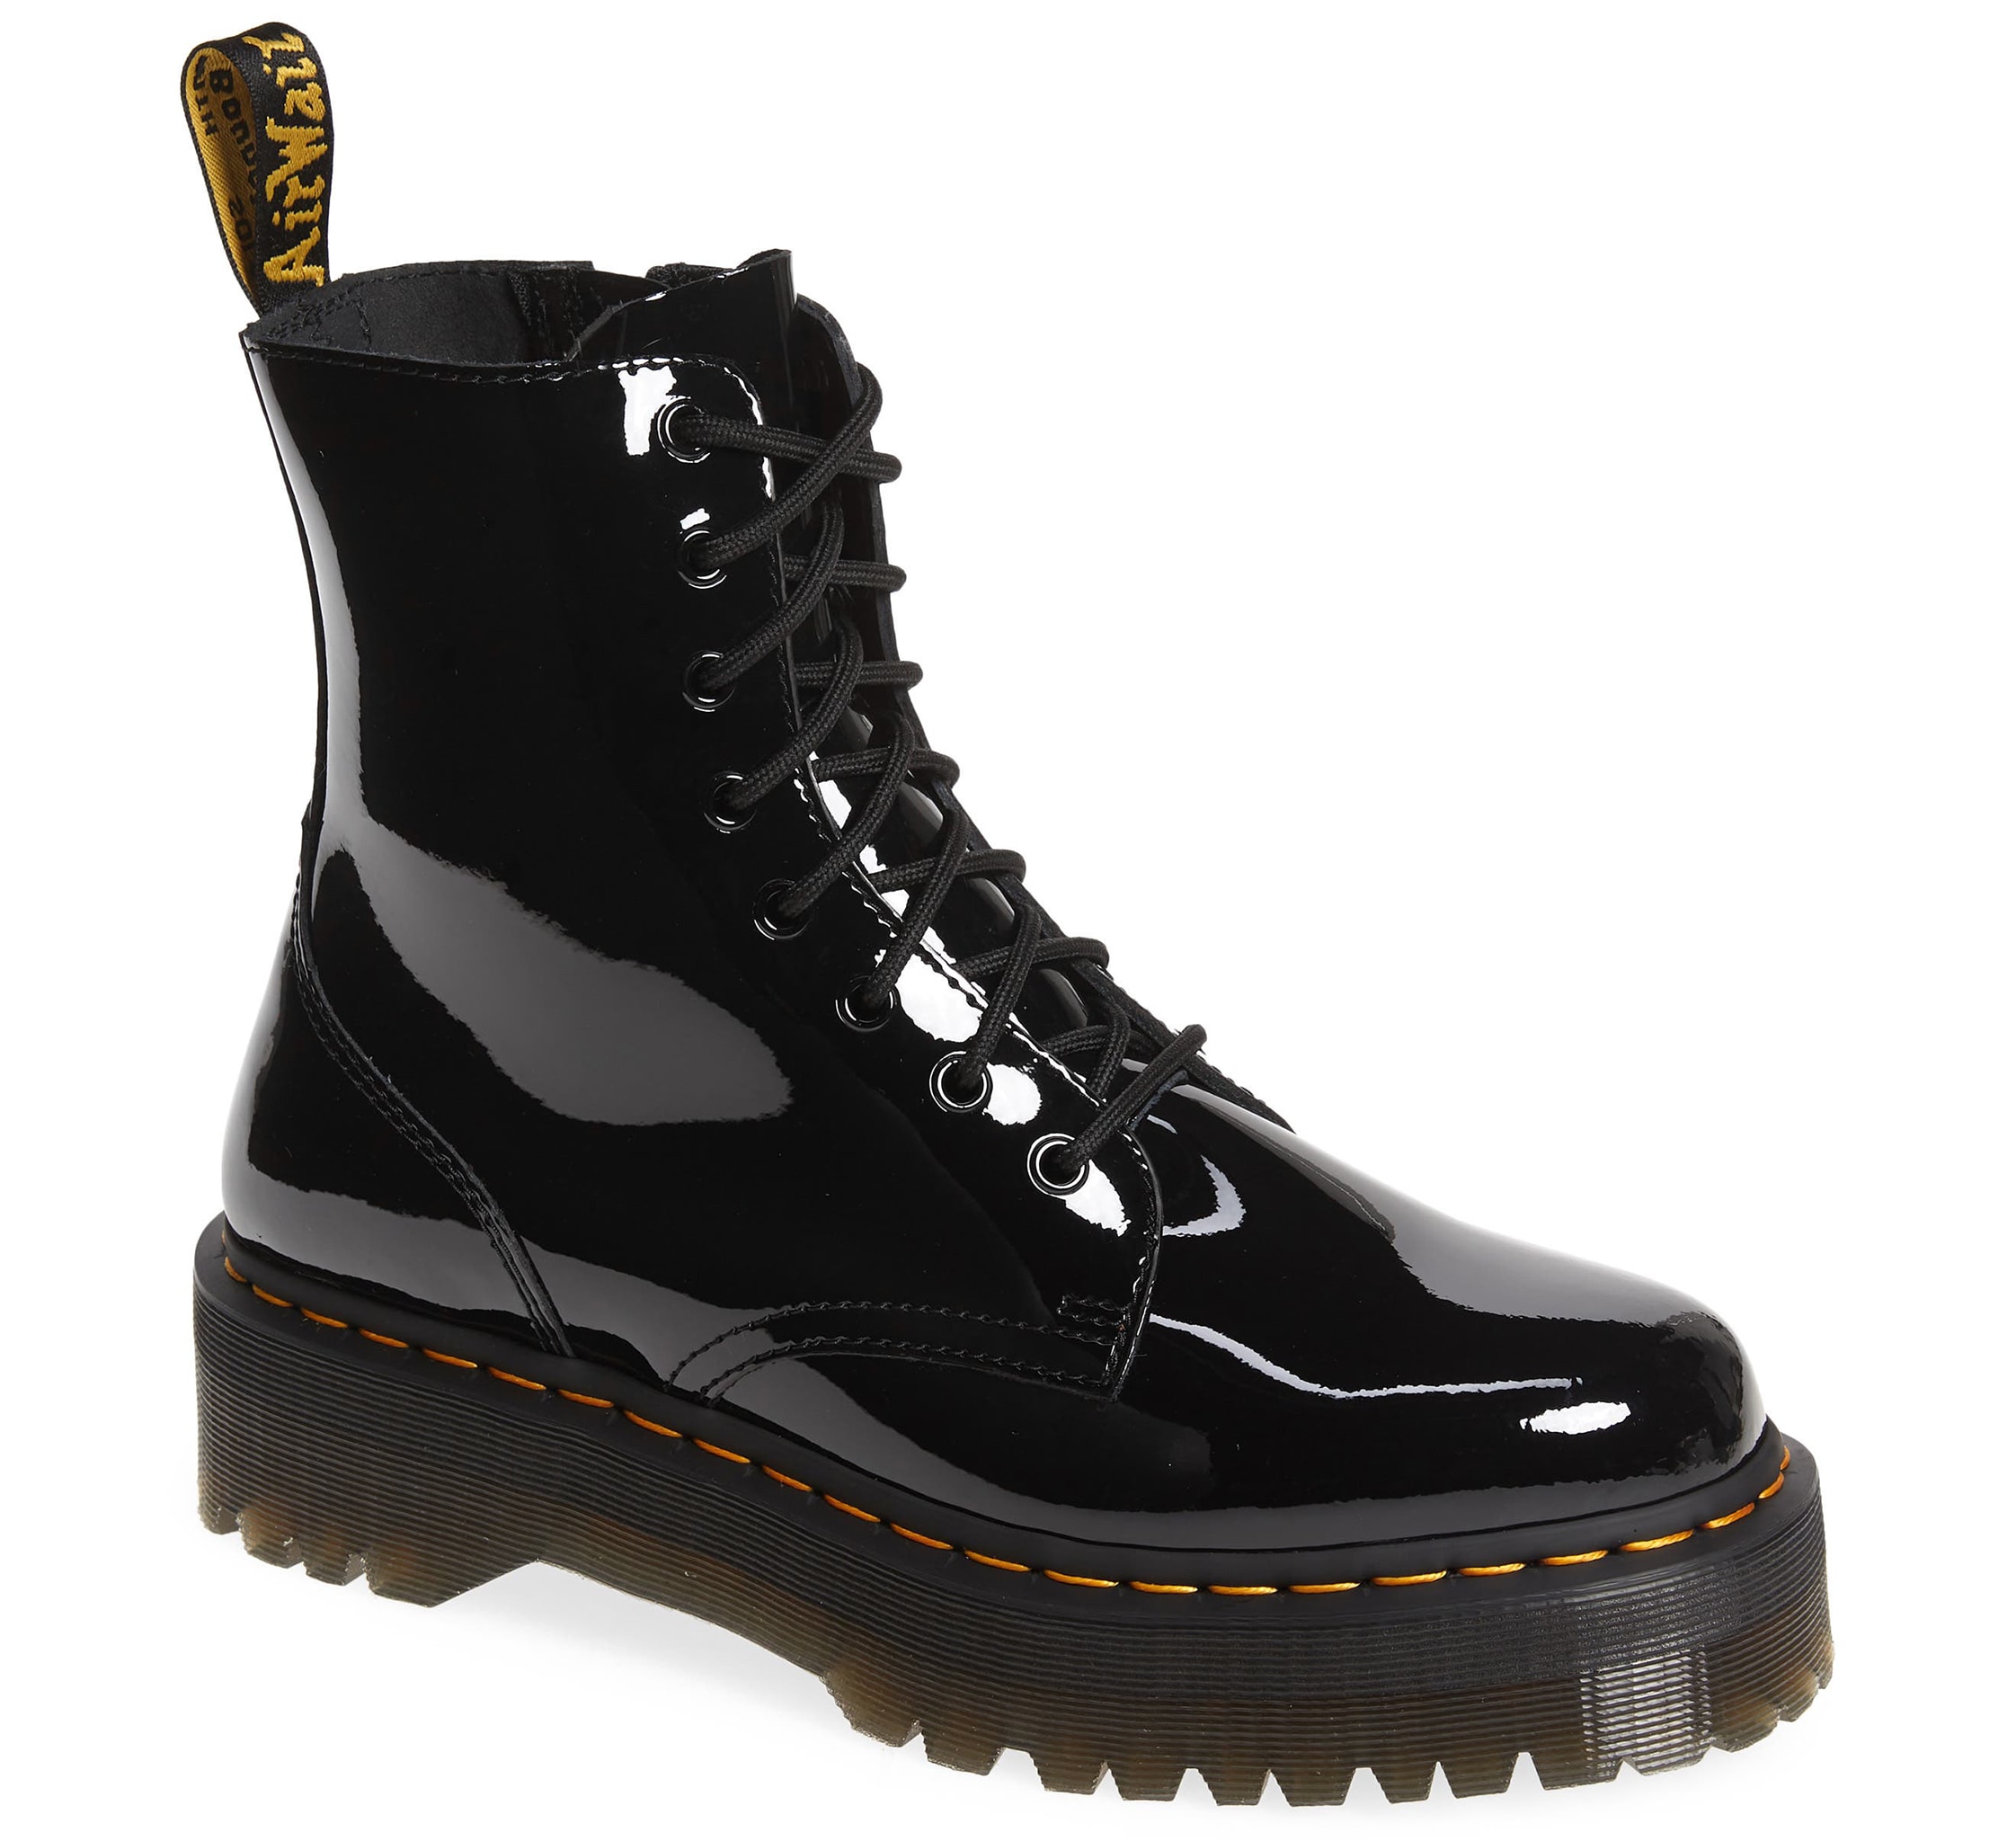 The Dr. Martens Jadon boots feature an '80s-rewind profile with a thick Quad Retro sole